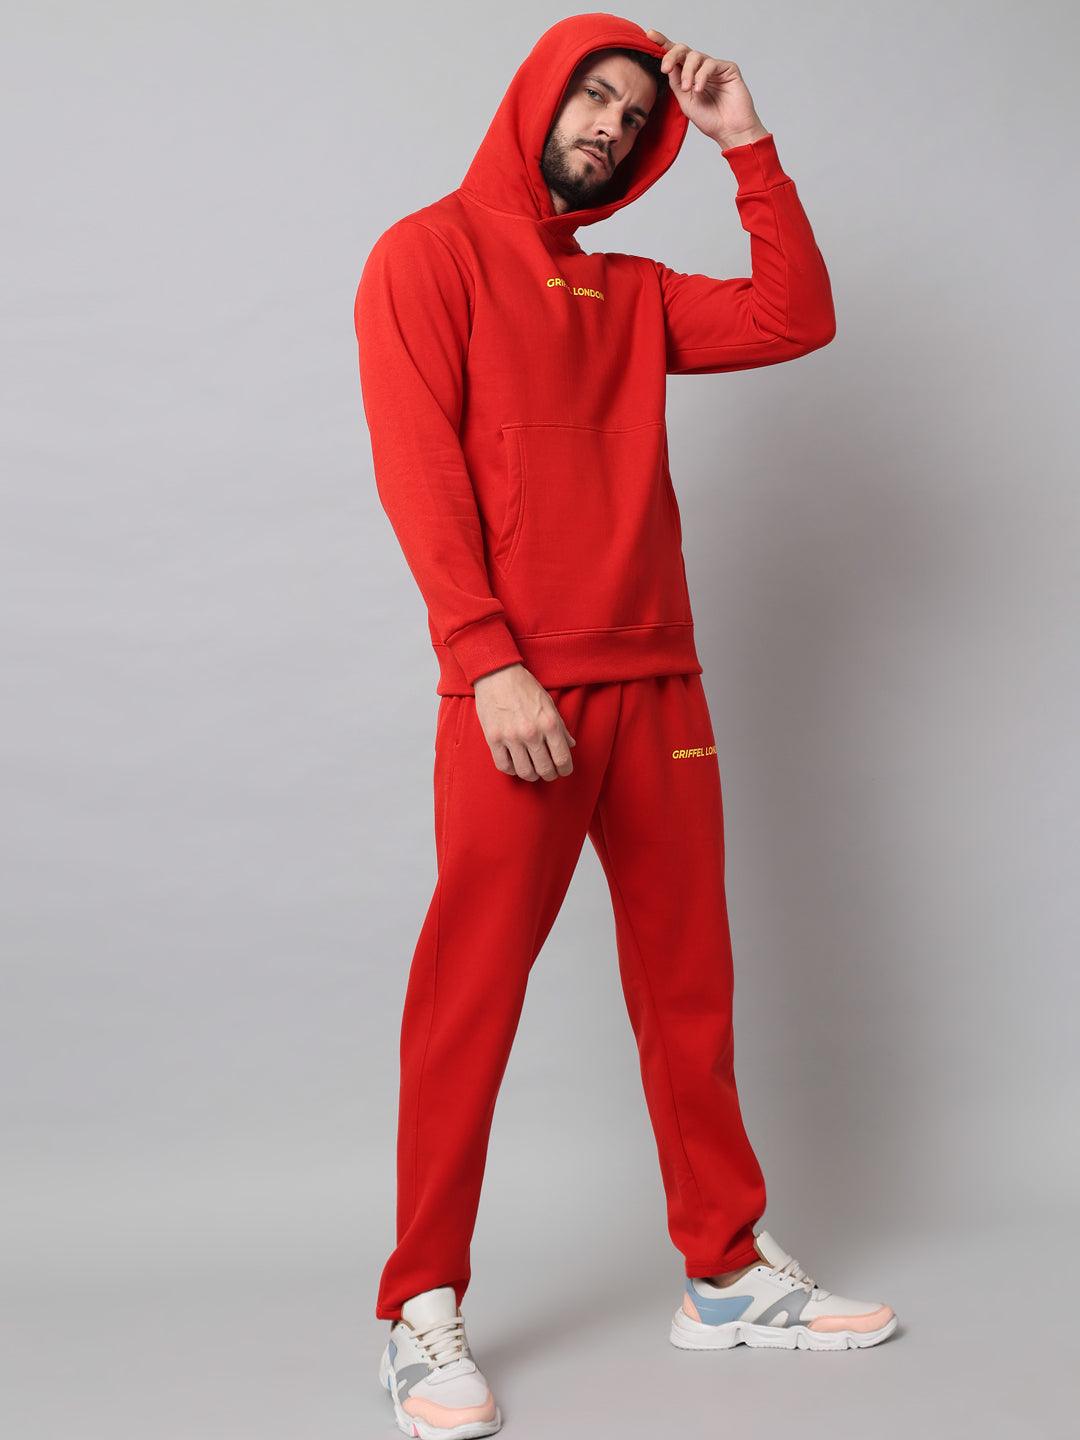 Griffel Men's Front Logo Solid Fleece Basic Hoodie and Joggers Full set Red Tracksuit - griffel